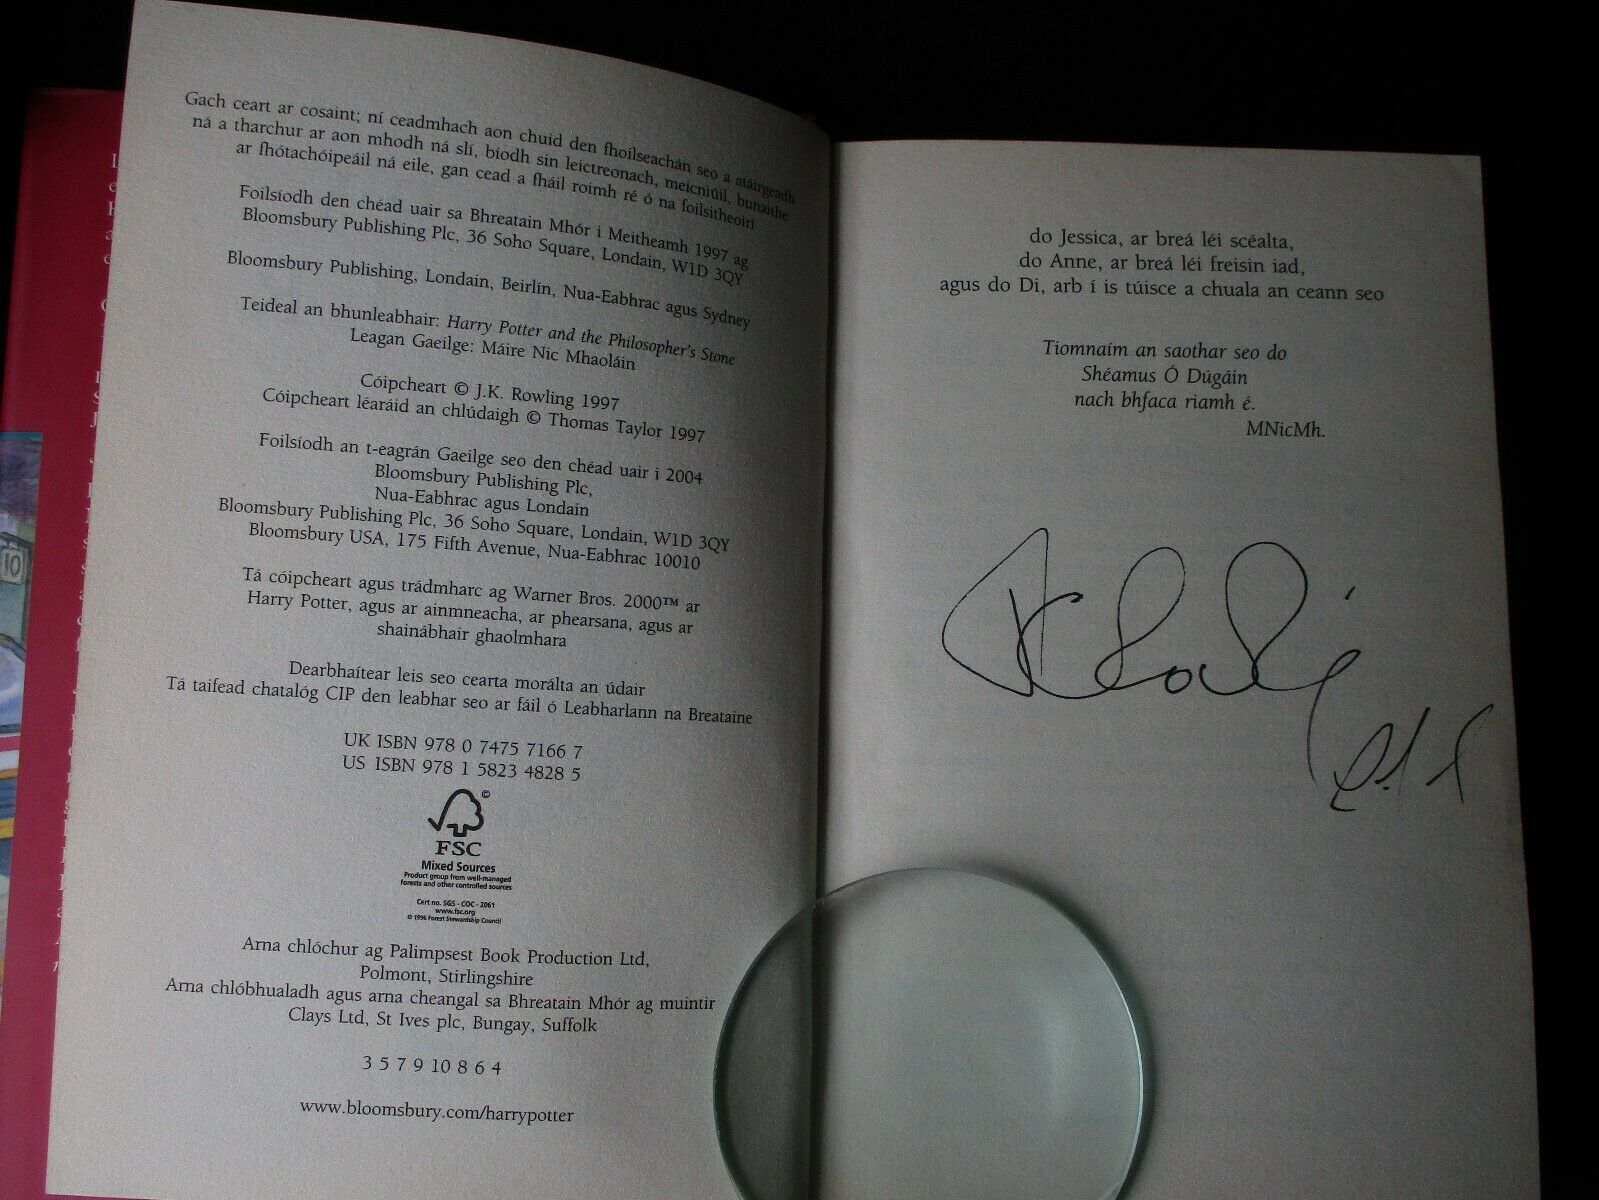 JK Rowling signature forgery found inside an Irish translation of Harry Potter and the Philosopher's Stone on ebay.